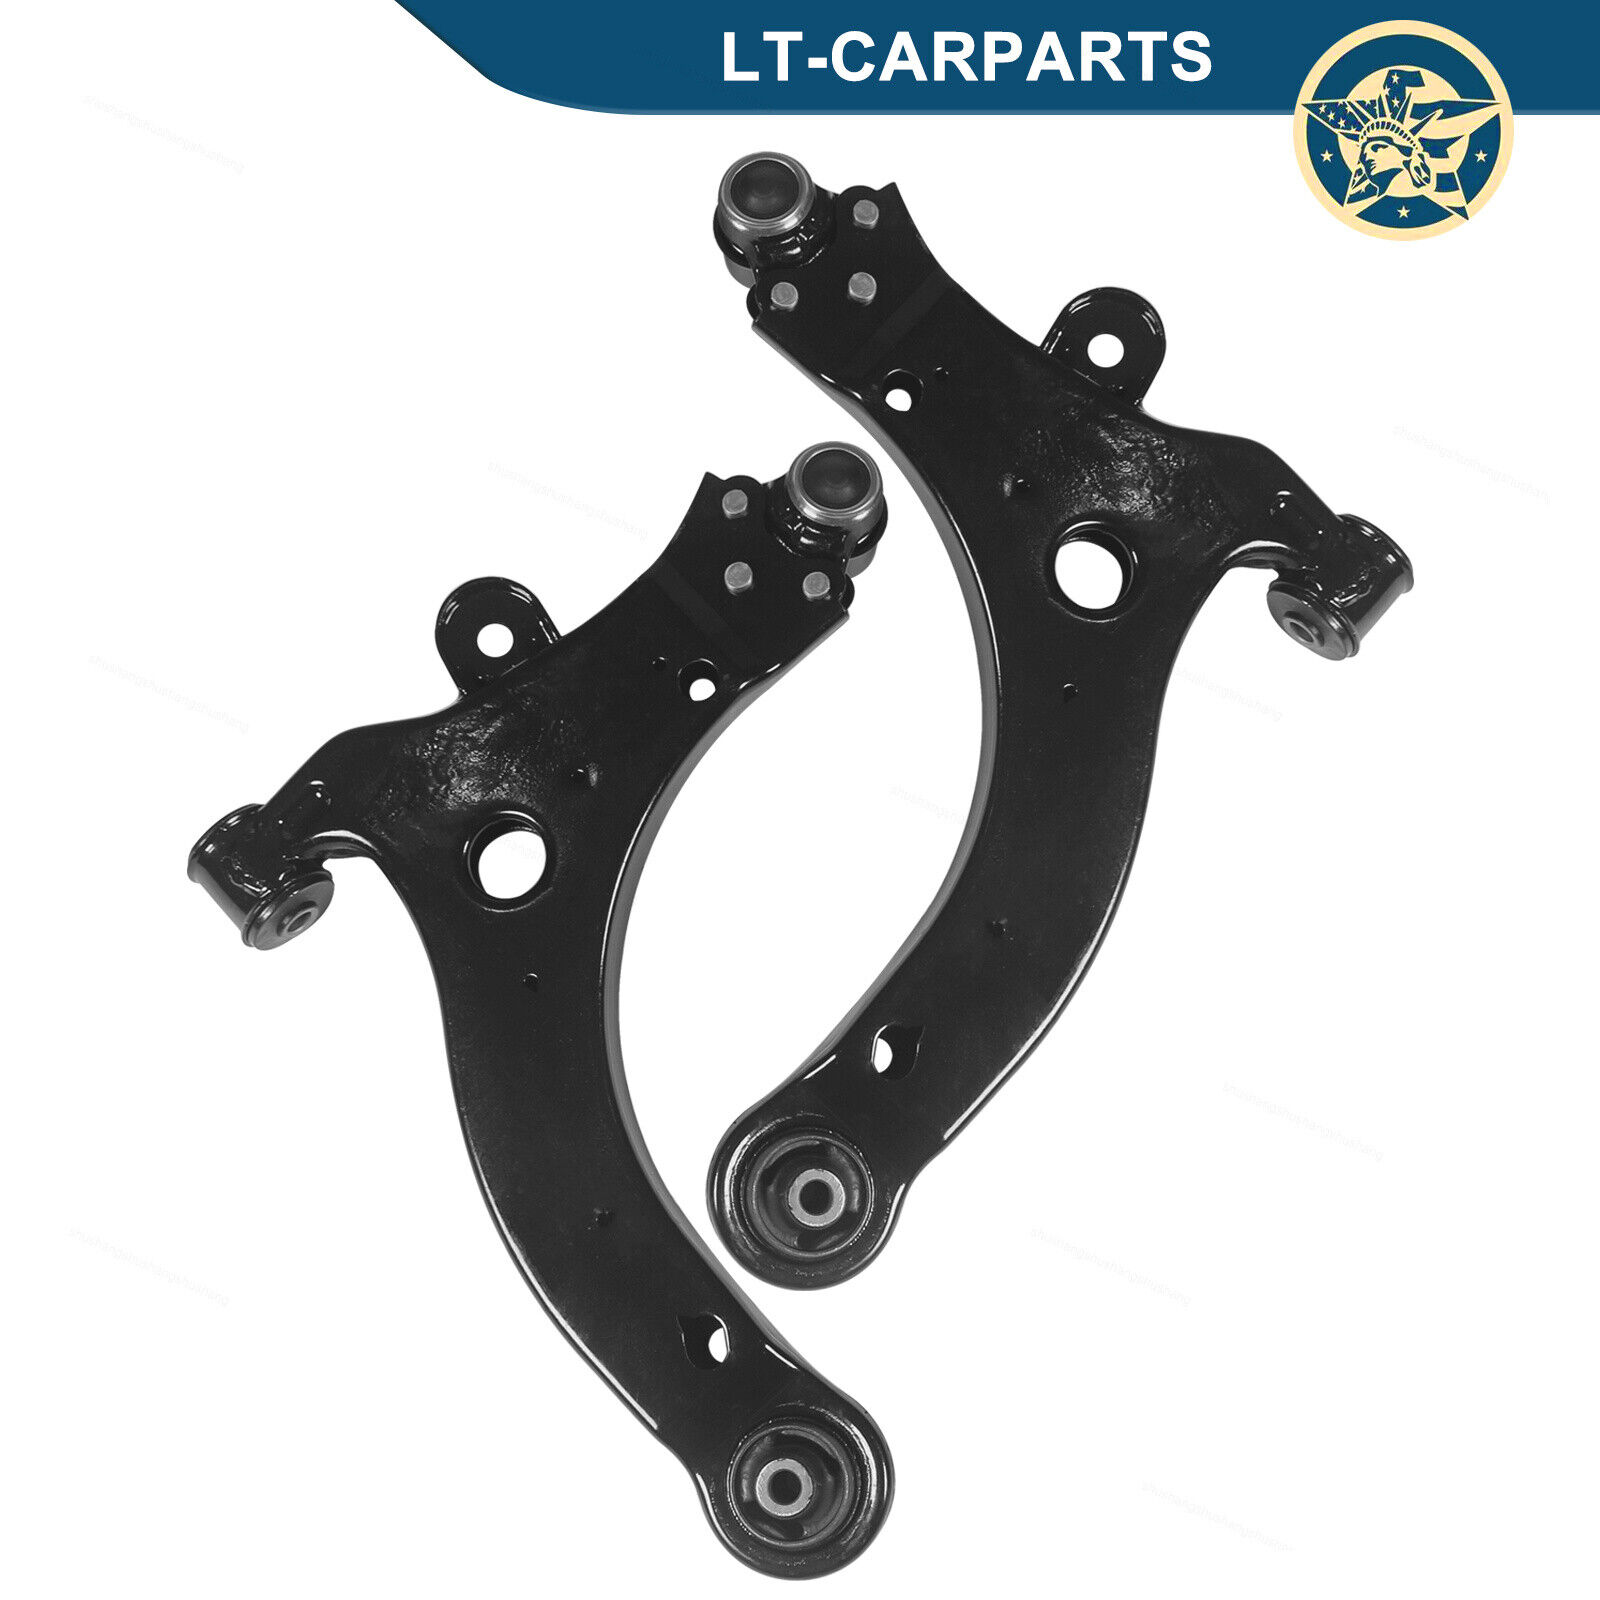 Front Lower Control Arms Fit For 1997-2005 Buick Century Venture Grand Prix